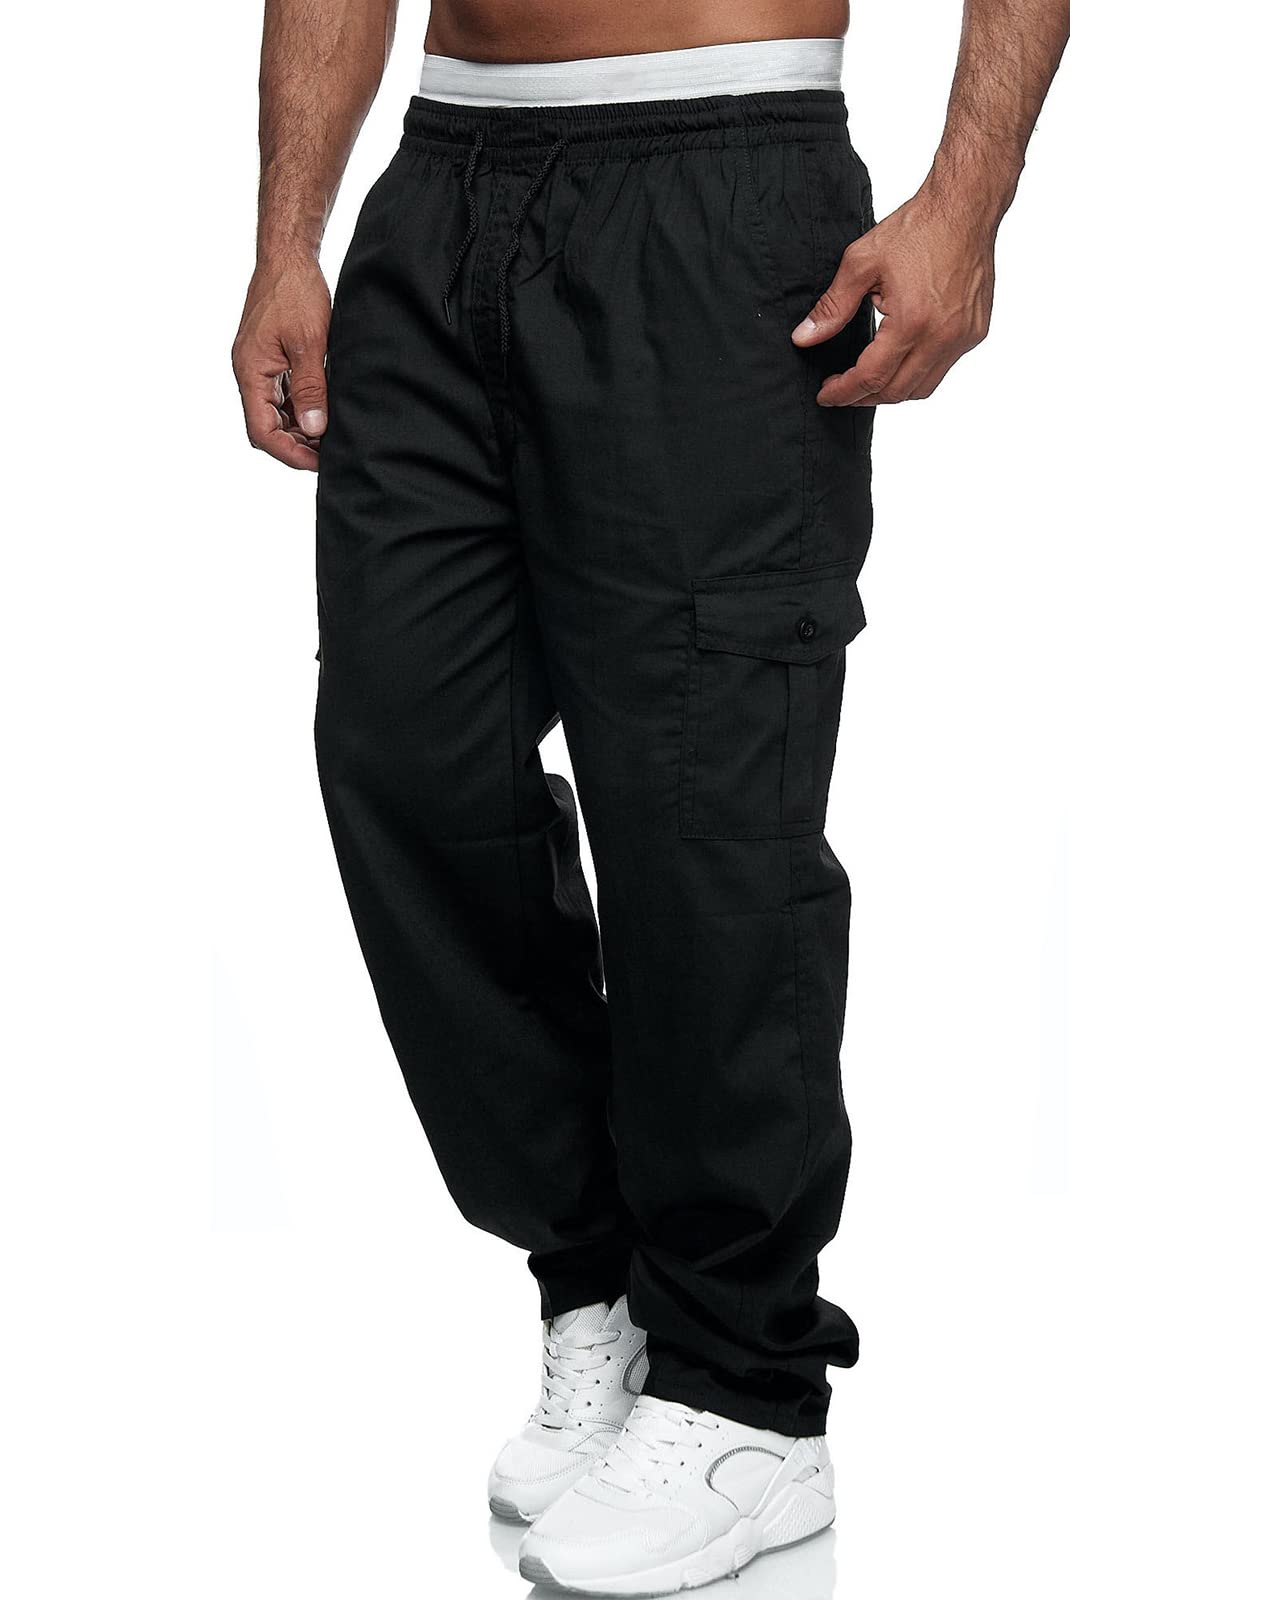 Men's Cargo Pants Relaxed Fit Sport Pants Jogger Sweatpants Drawstring  Outdoor Trousers with Pockets 3X Black